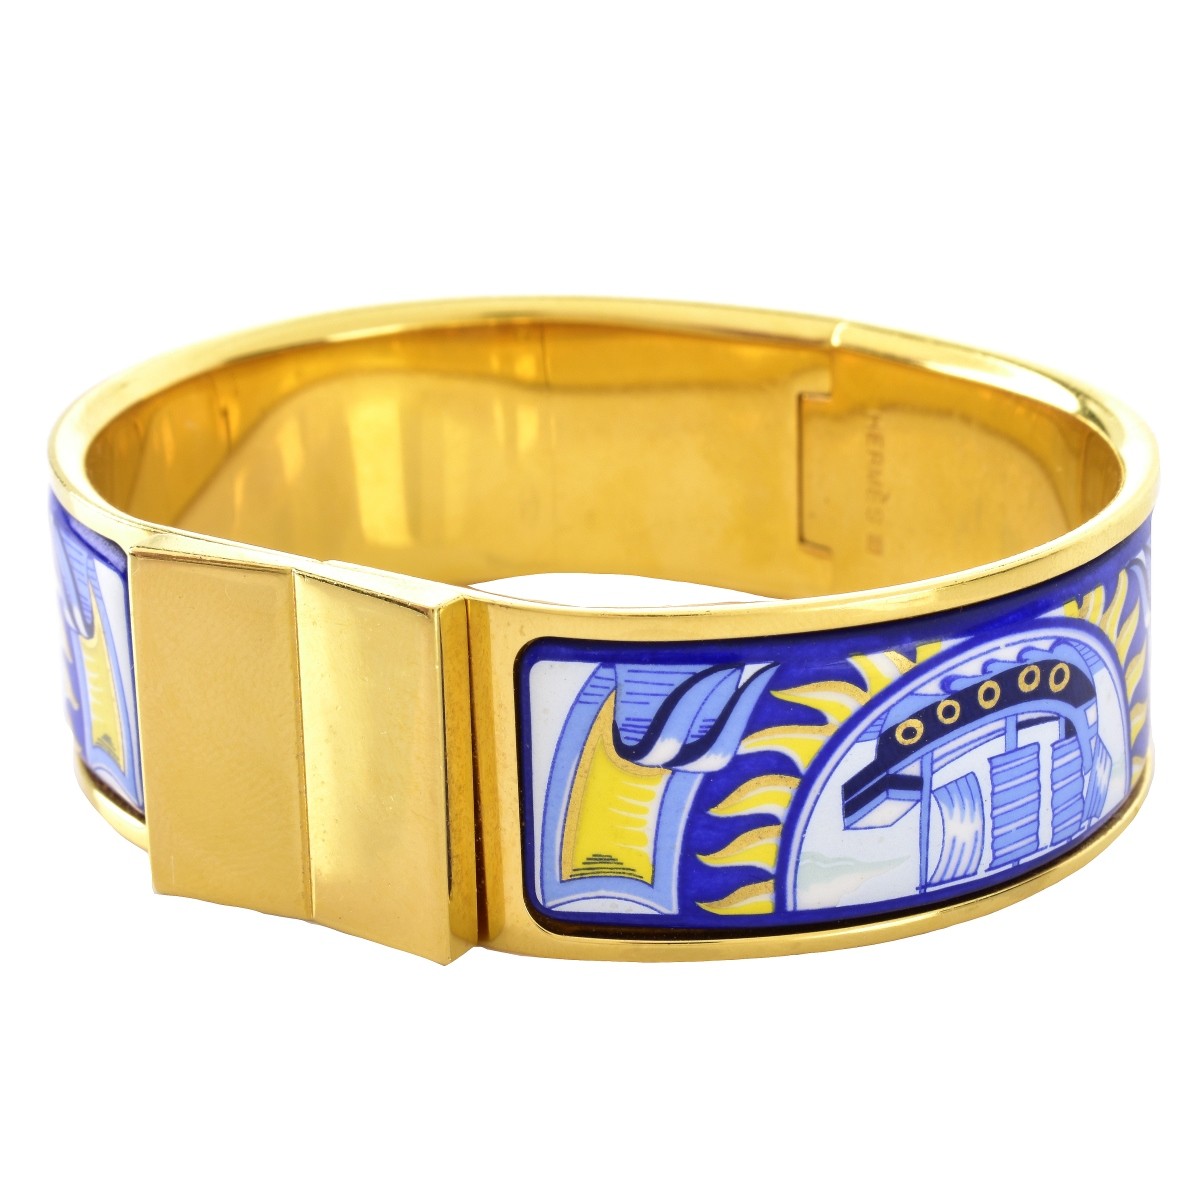 Hermes Gold Plate and Enamel Cuff Bangle